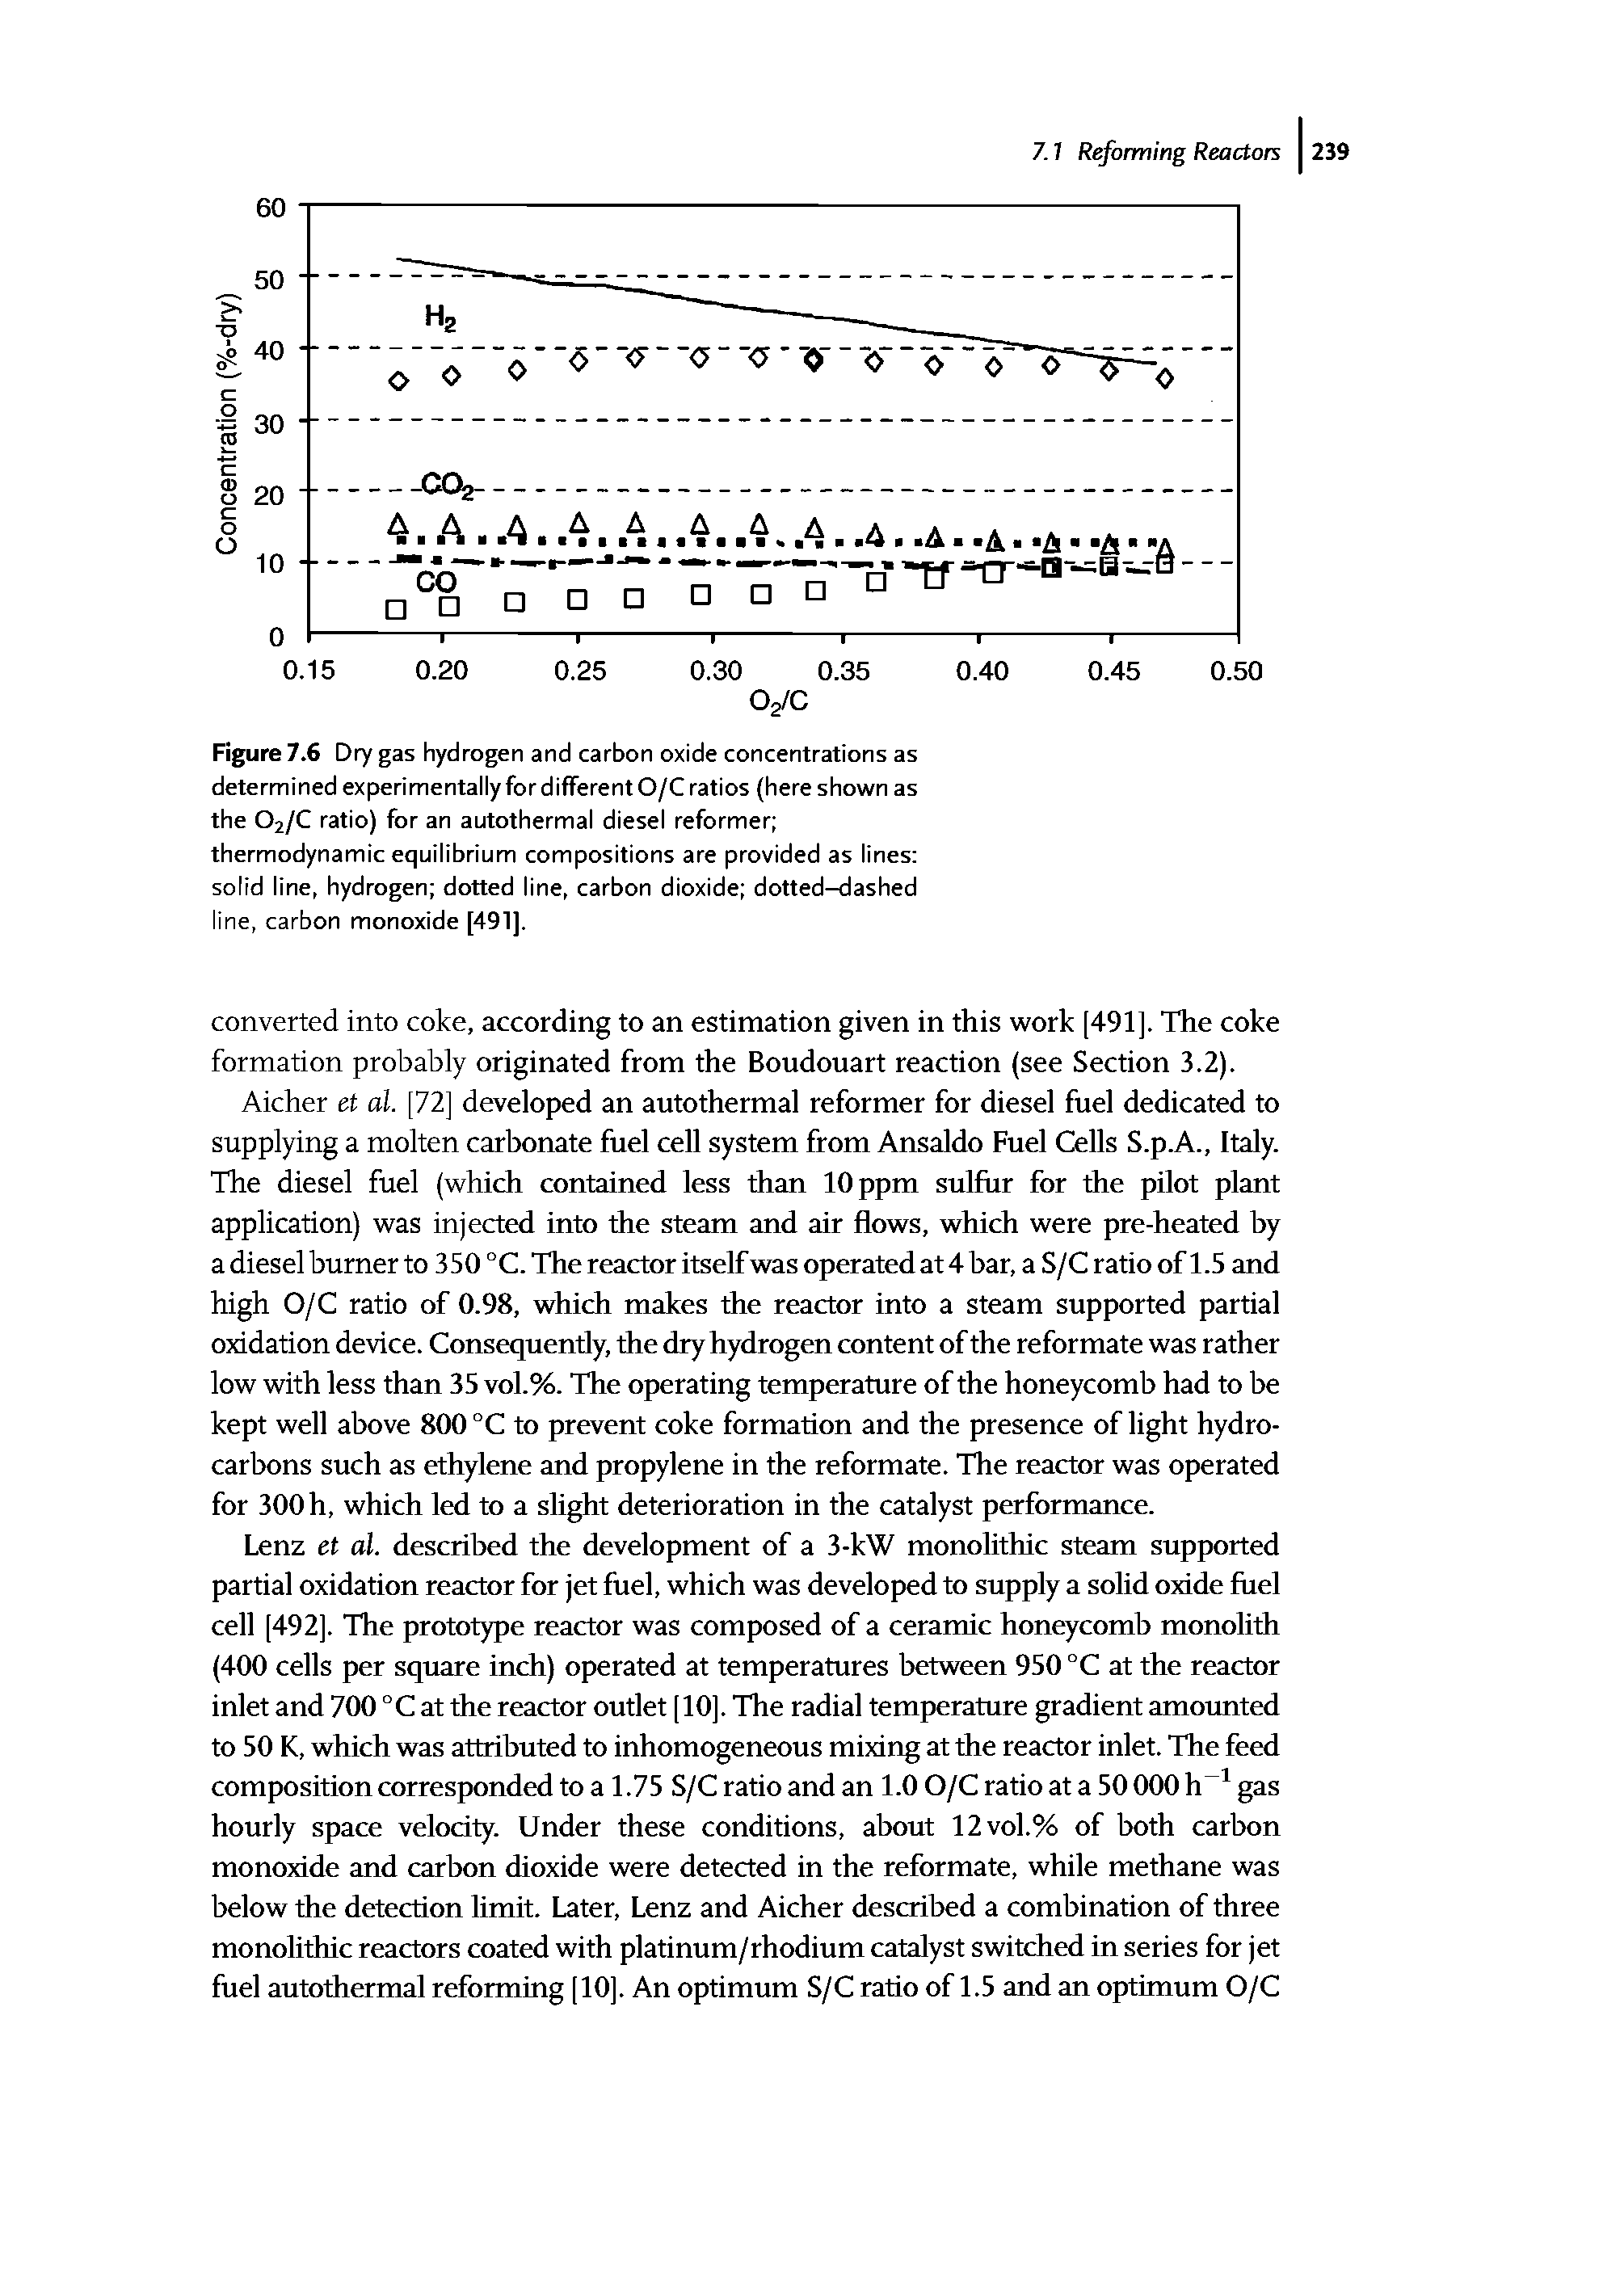 Figure 7.6 Dry gas hydrogen and carbon oxide concentrations as determined experimentally for different O/C ratios (here shown as the O2/C ratio) for an autothermal diesel reformer thermodynamic equilibrium compositions are provided as lines solid line, hydrogen dotted line, carbon dioxide dotted-dashed line, carbon monoxide [491],...